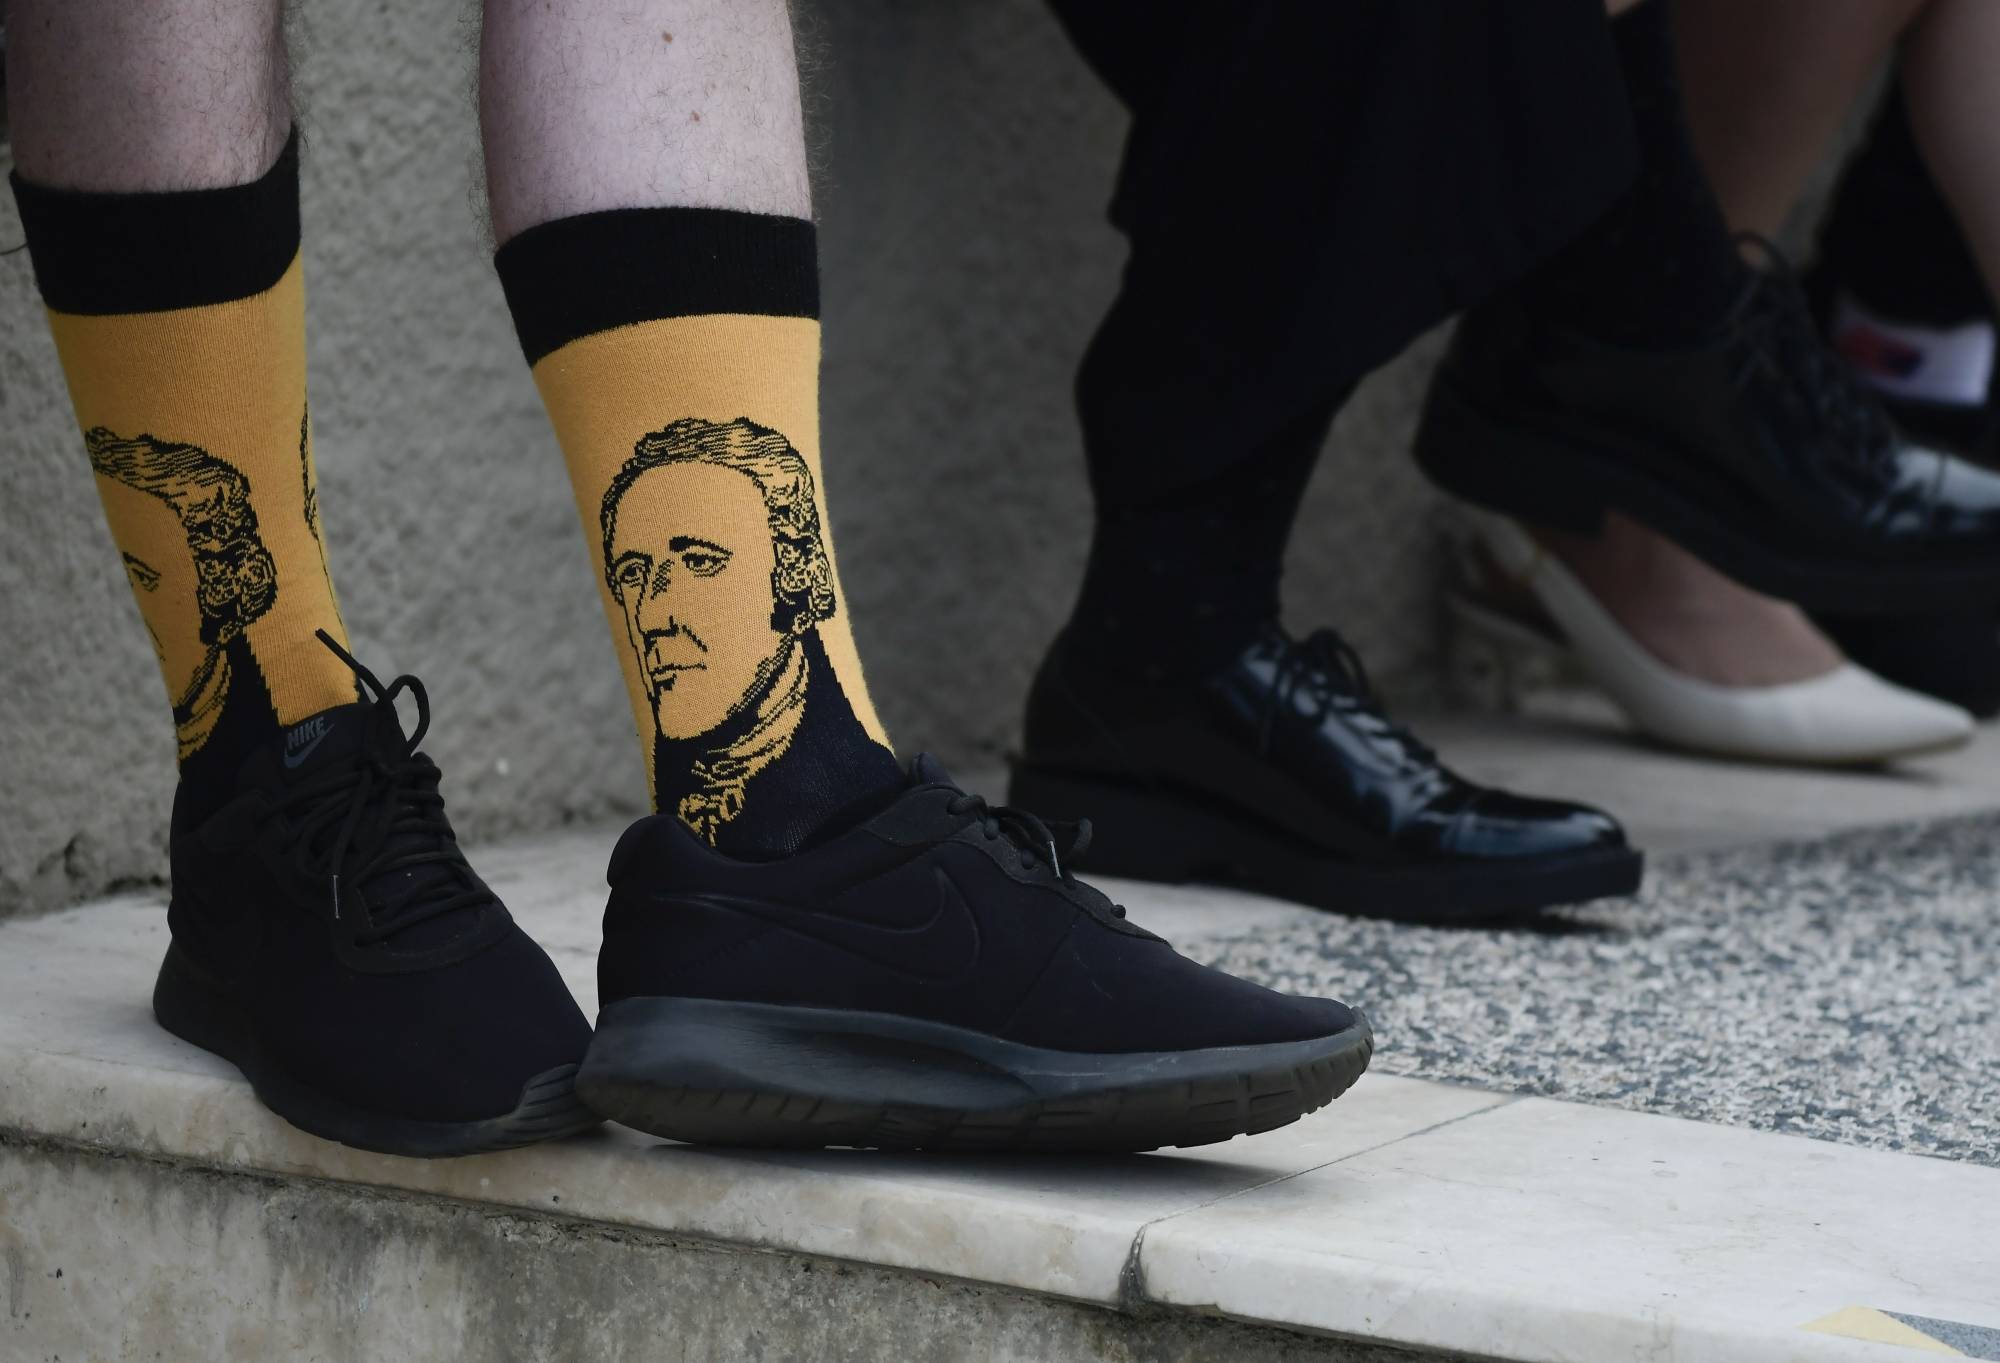 Scotland national Paul Mcque wears Hamilton socks in the entrance plaza of the Santurce Fine Arts Center moments before the premiere of the award-winning Broadway musical, Hamilton, starring its creator, New York native of Puerto Rican descent Lin-Manuel Miranda, in San Juan, Puerto Rico, Friday Jan. 11, 2019. The musical is set to run for two weeks and will raise money for local arts programs. (AP Photo/Carlos Giusti)